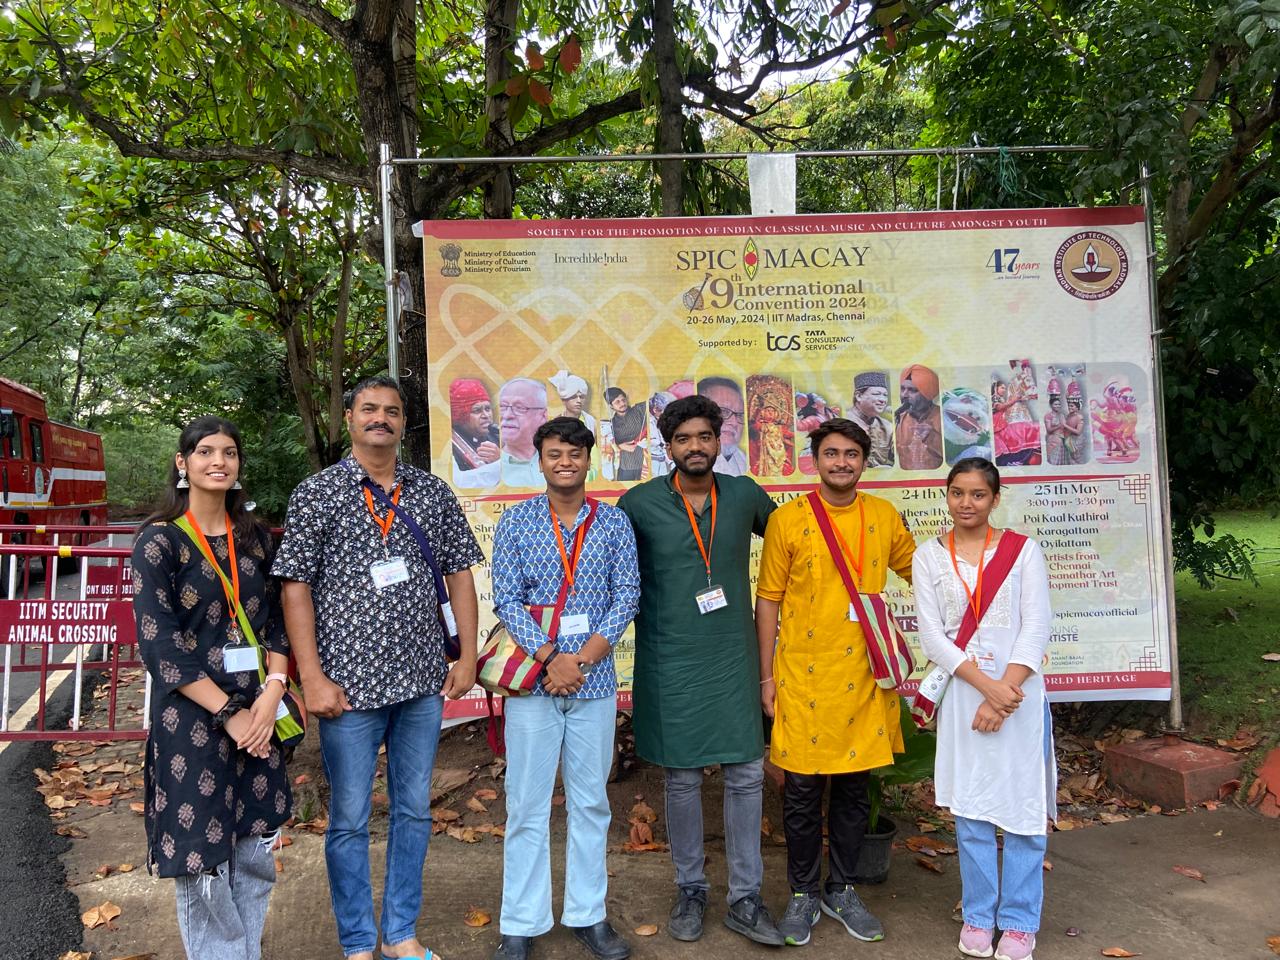 SPSU’s Representation at IIT Madras in the International Spic Macay Convention